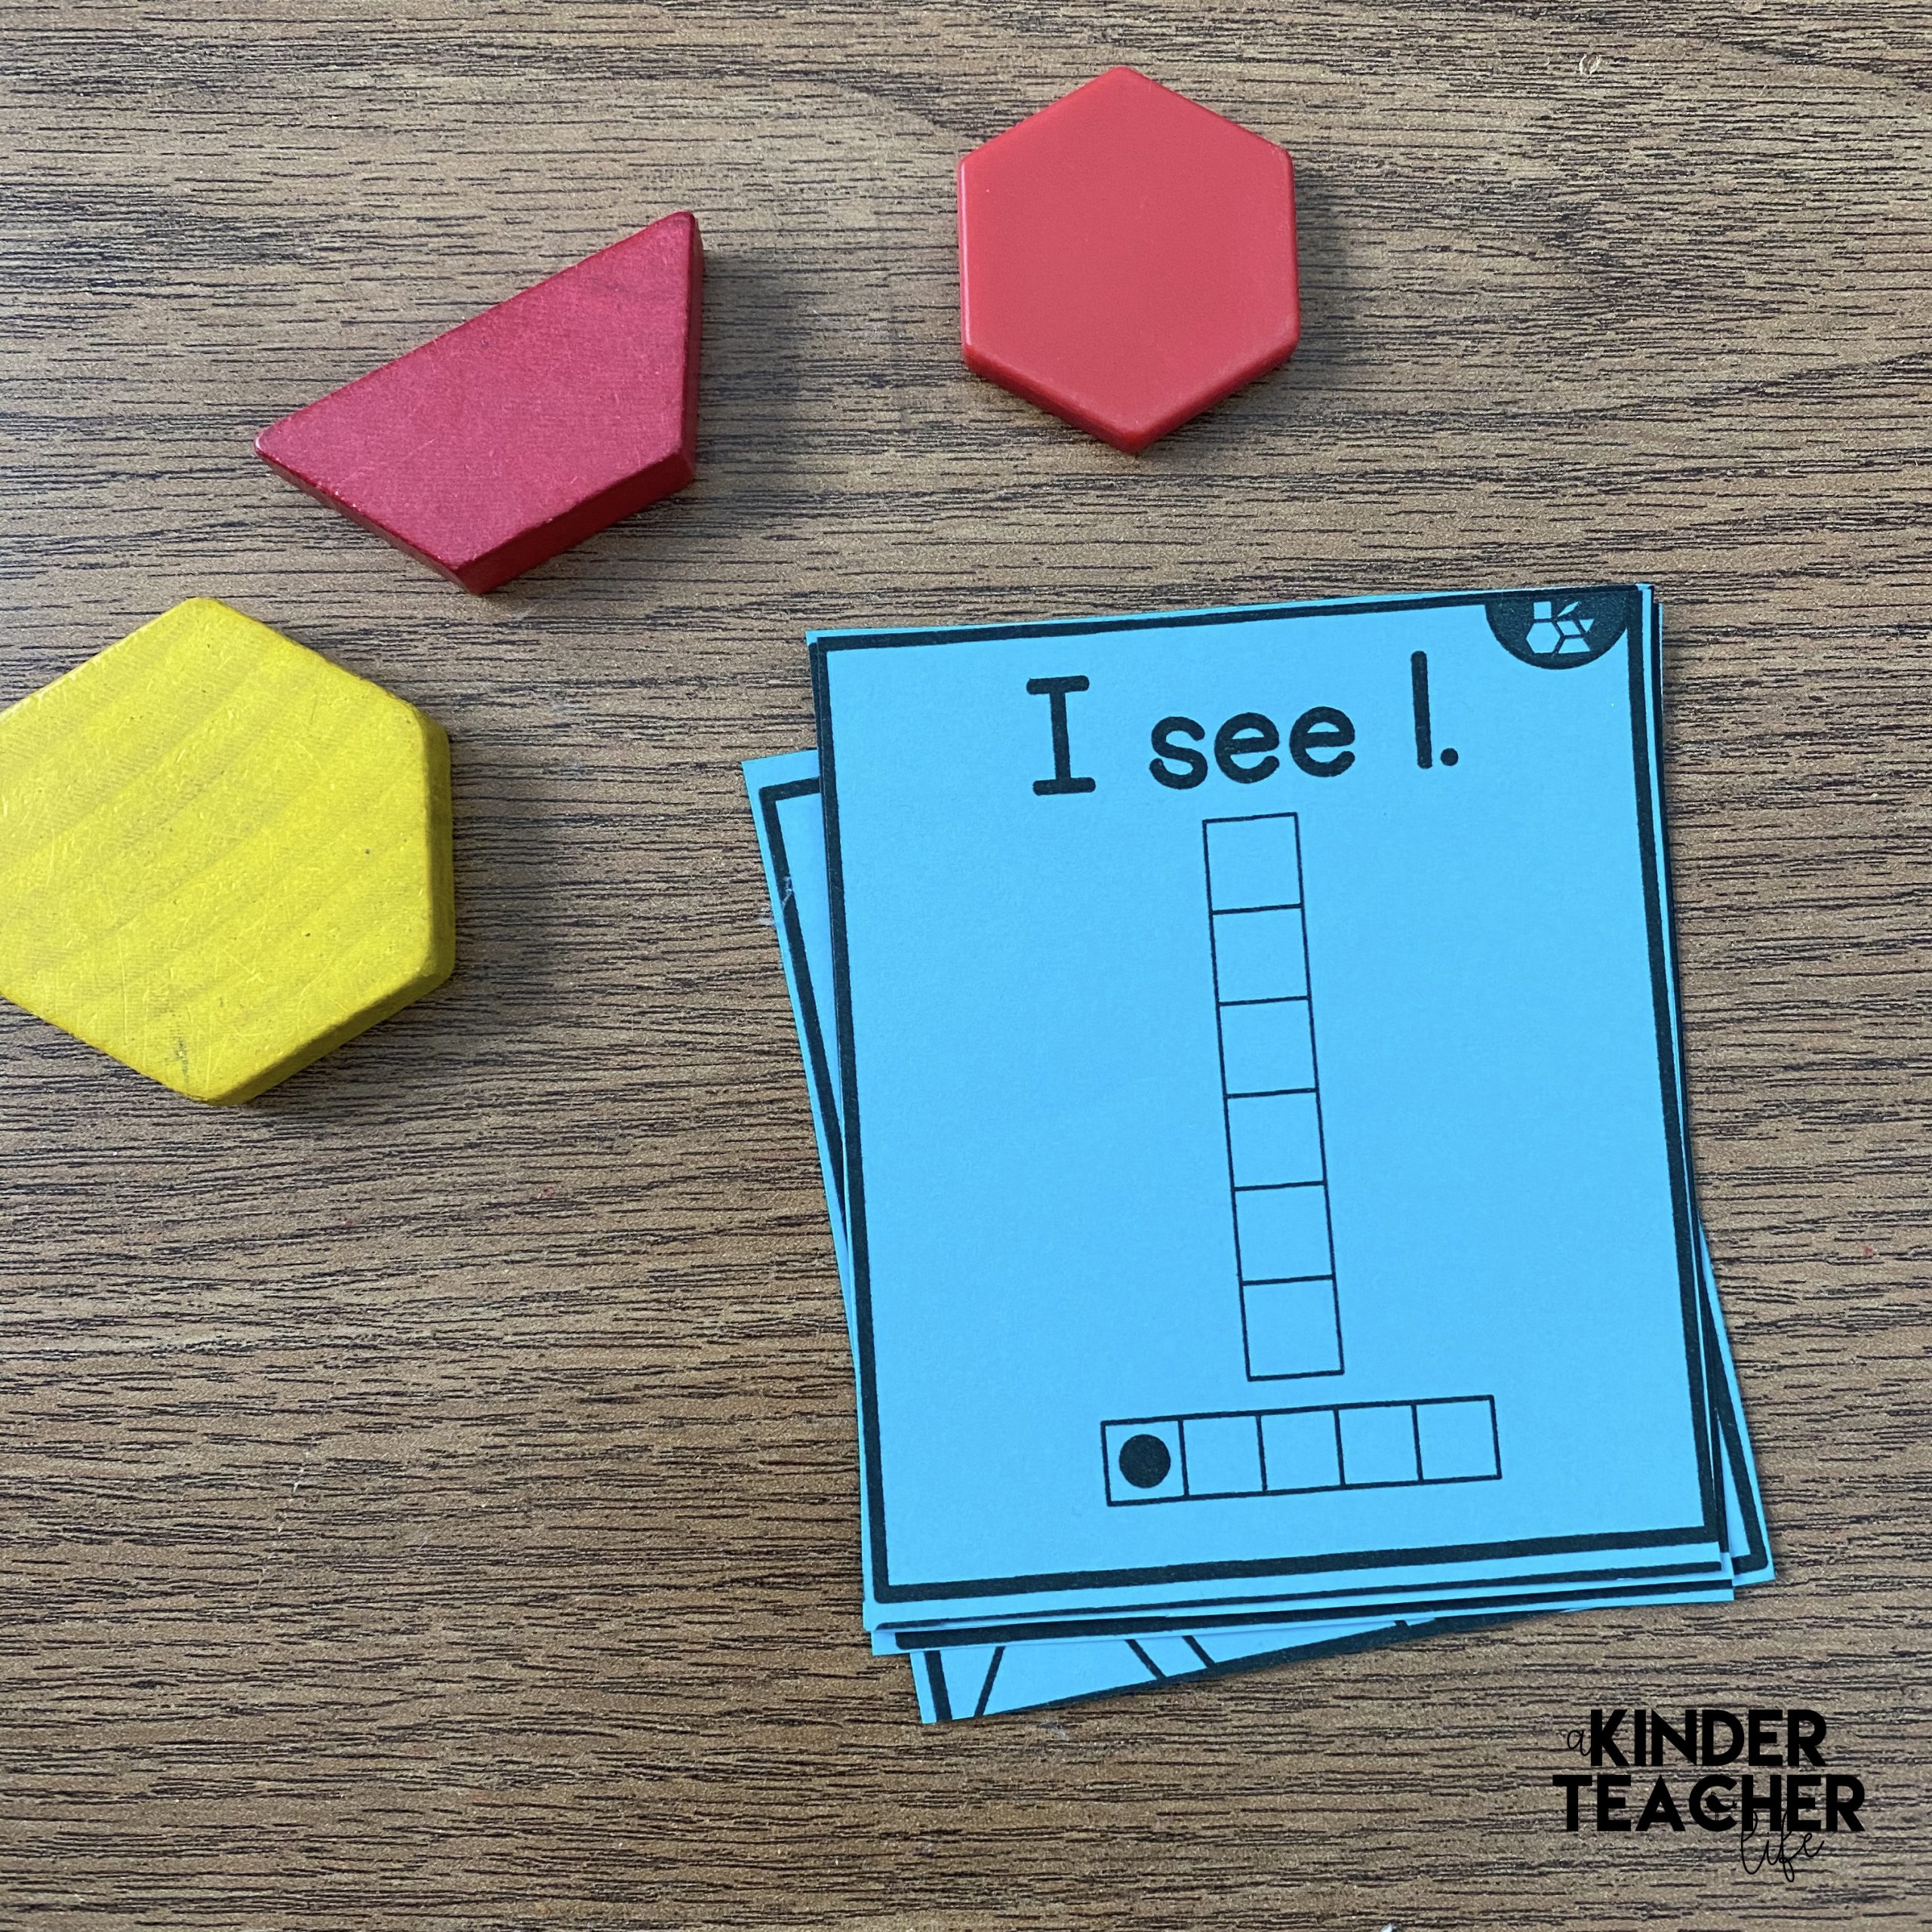 Pattern Block Task Cards - Use pattern blocks to build numbers and letters.